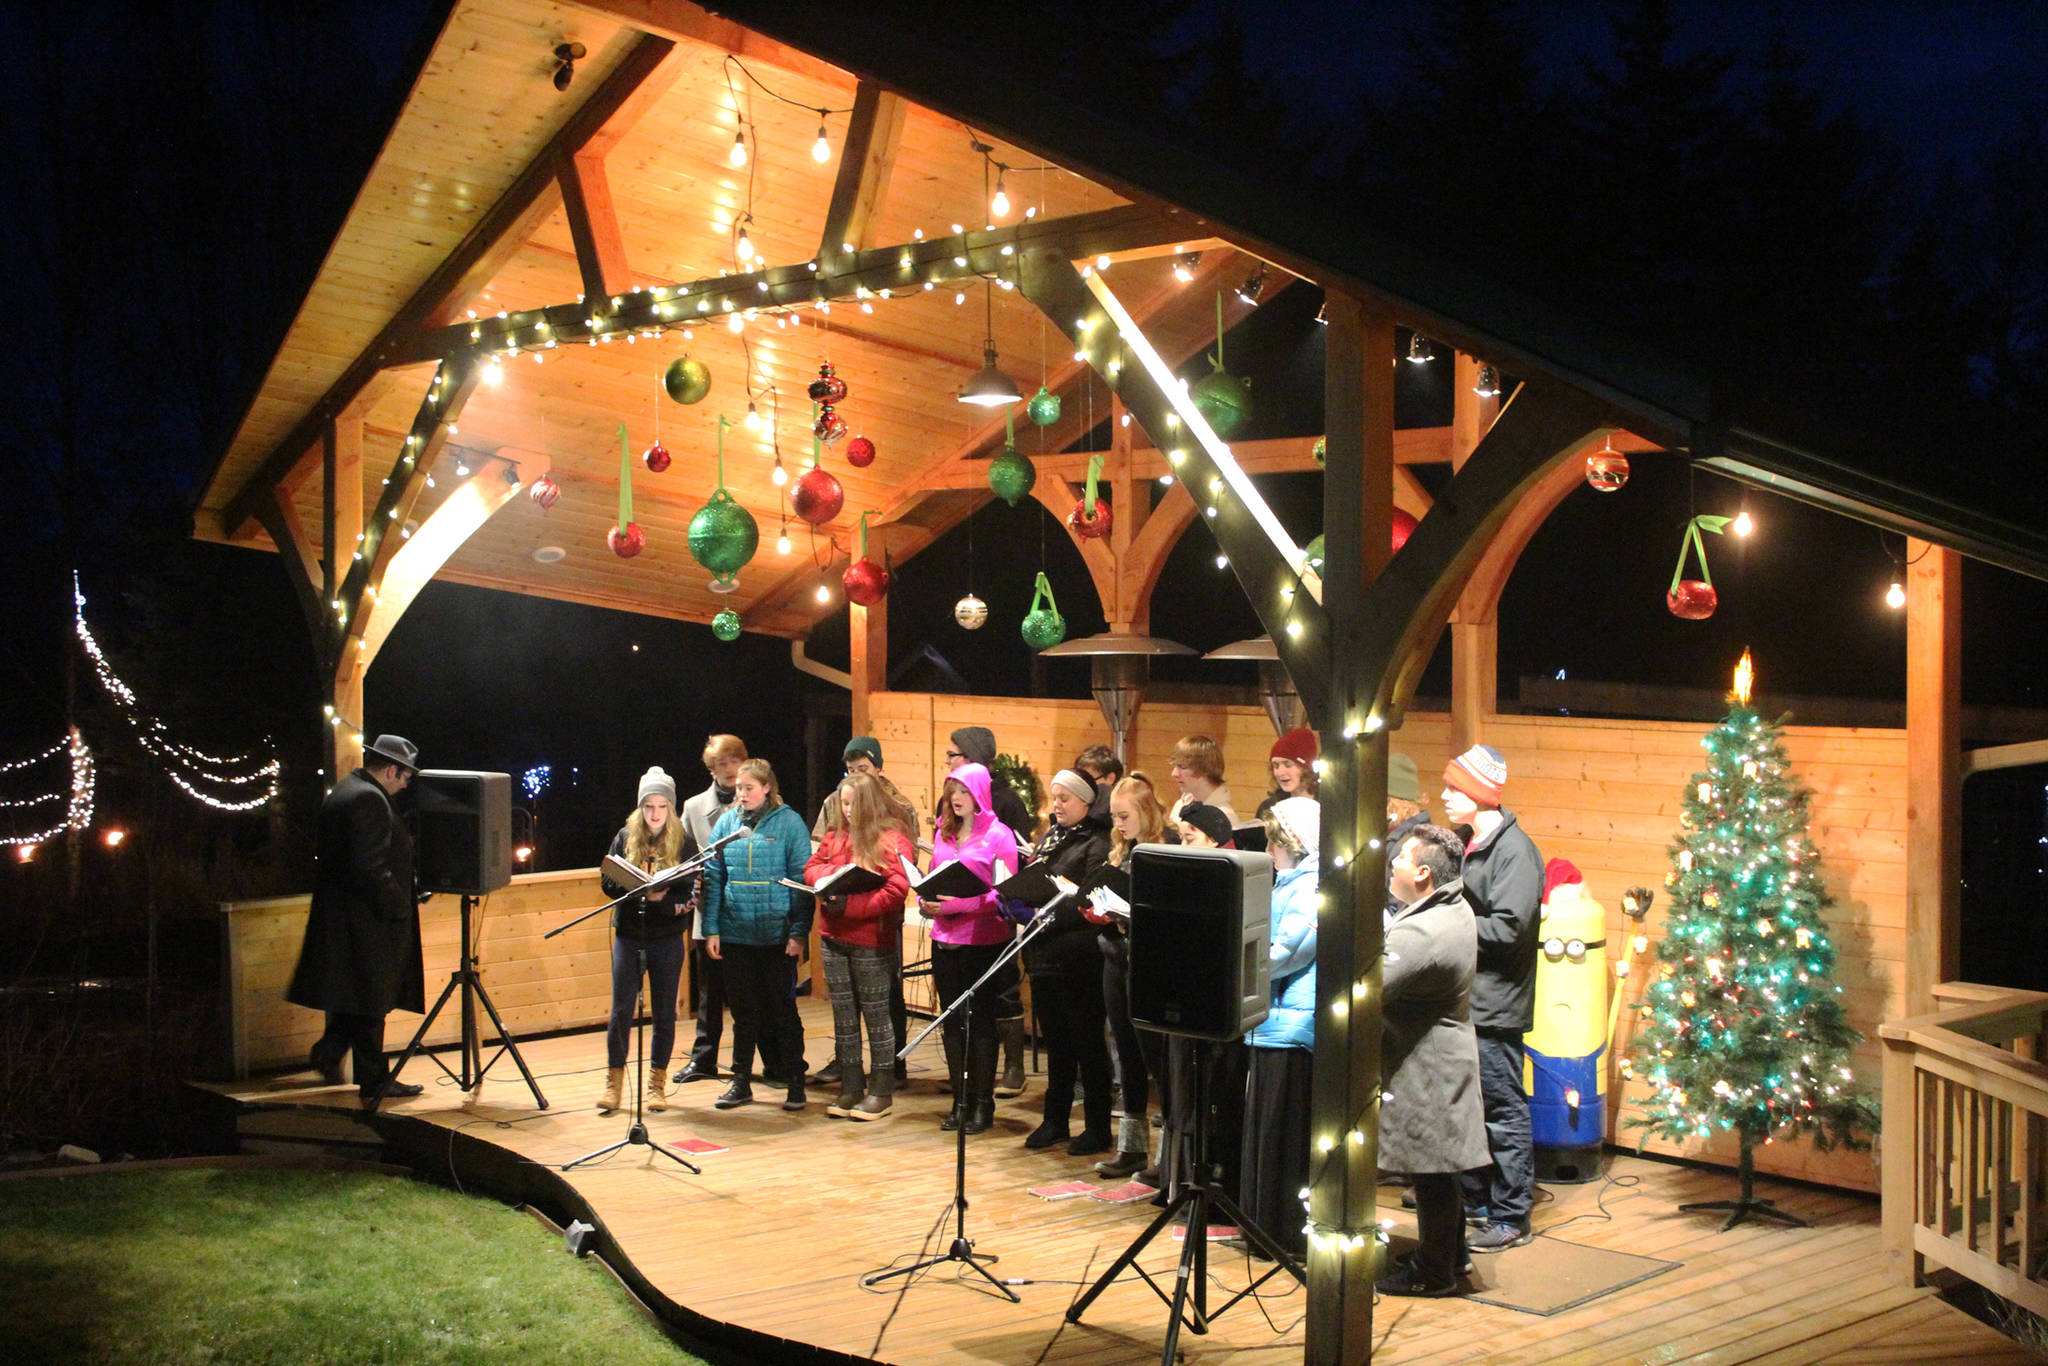 Members of the Homer High School Swing Choir serenade passersby from a pavilion on the Bear Creek Winery Gardens on Saturday, Dec. 16, 2017 near Homer, Alaska. The business hosts each year the Bear Creek Winery Garden of Lights, which feature a lighted evening walk through the gardens, which are decked out with holiday lights and structures. (Photo by Megan Pacer/Homer News)